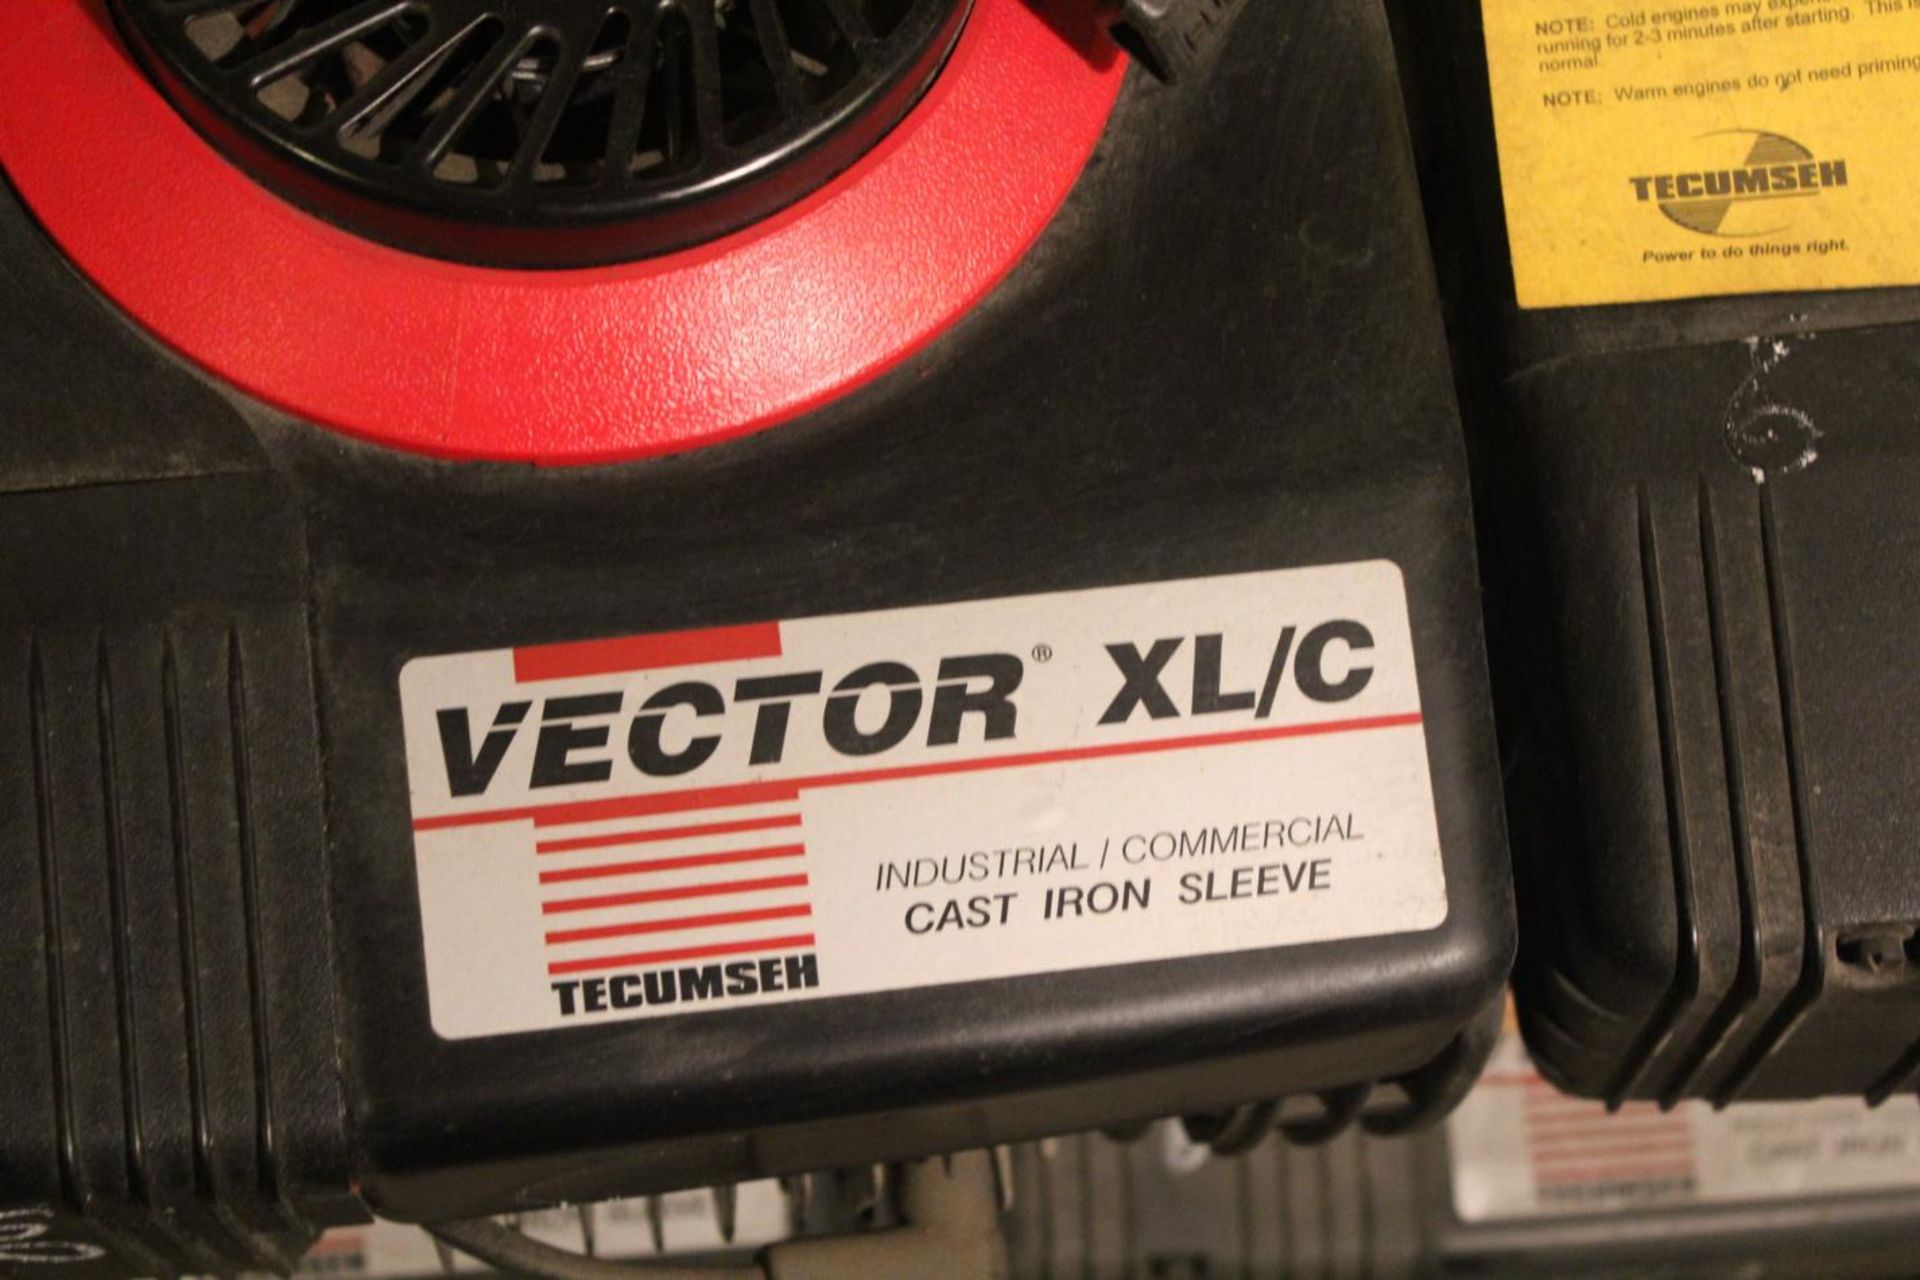 Tecumseh 6HP Vector XL/C Electric Start Gas Motors, Engine Model VLV-126 New old Stock - Image 3 of 5